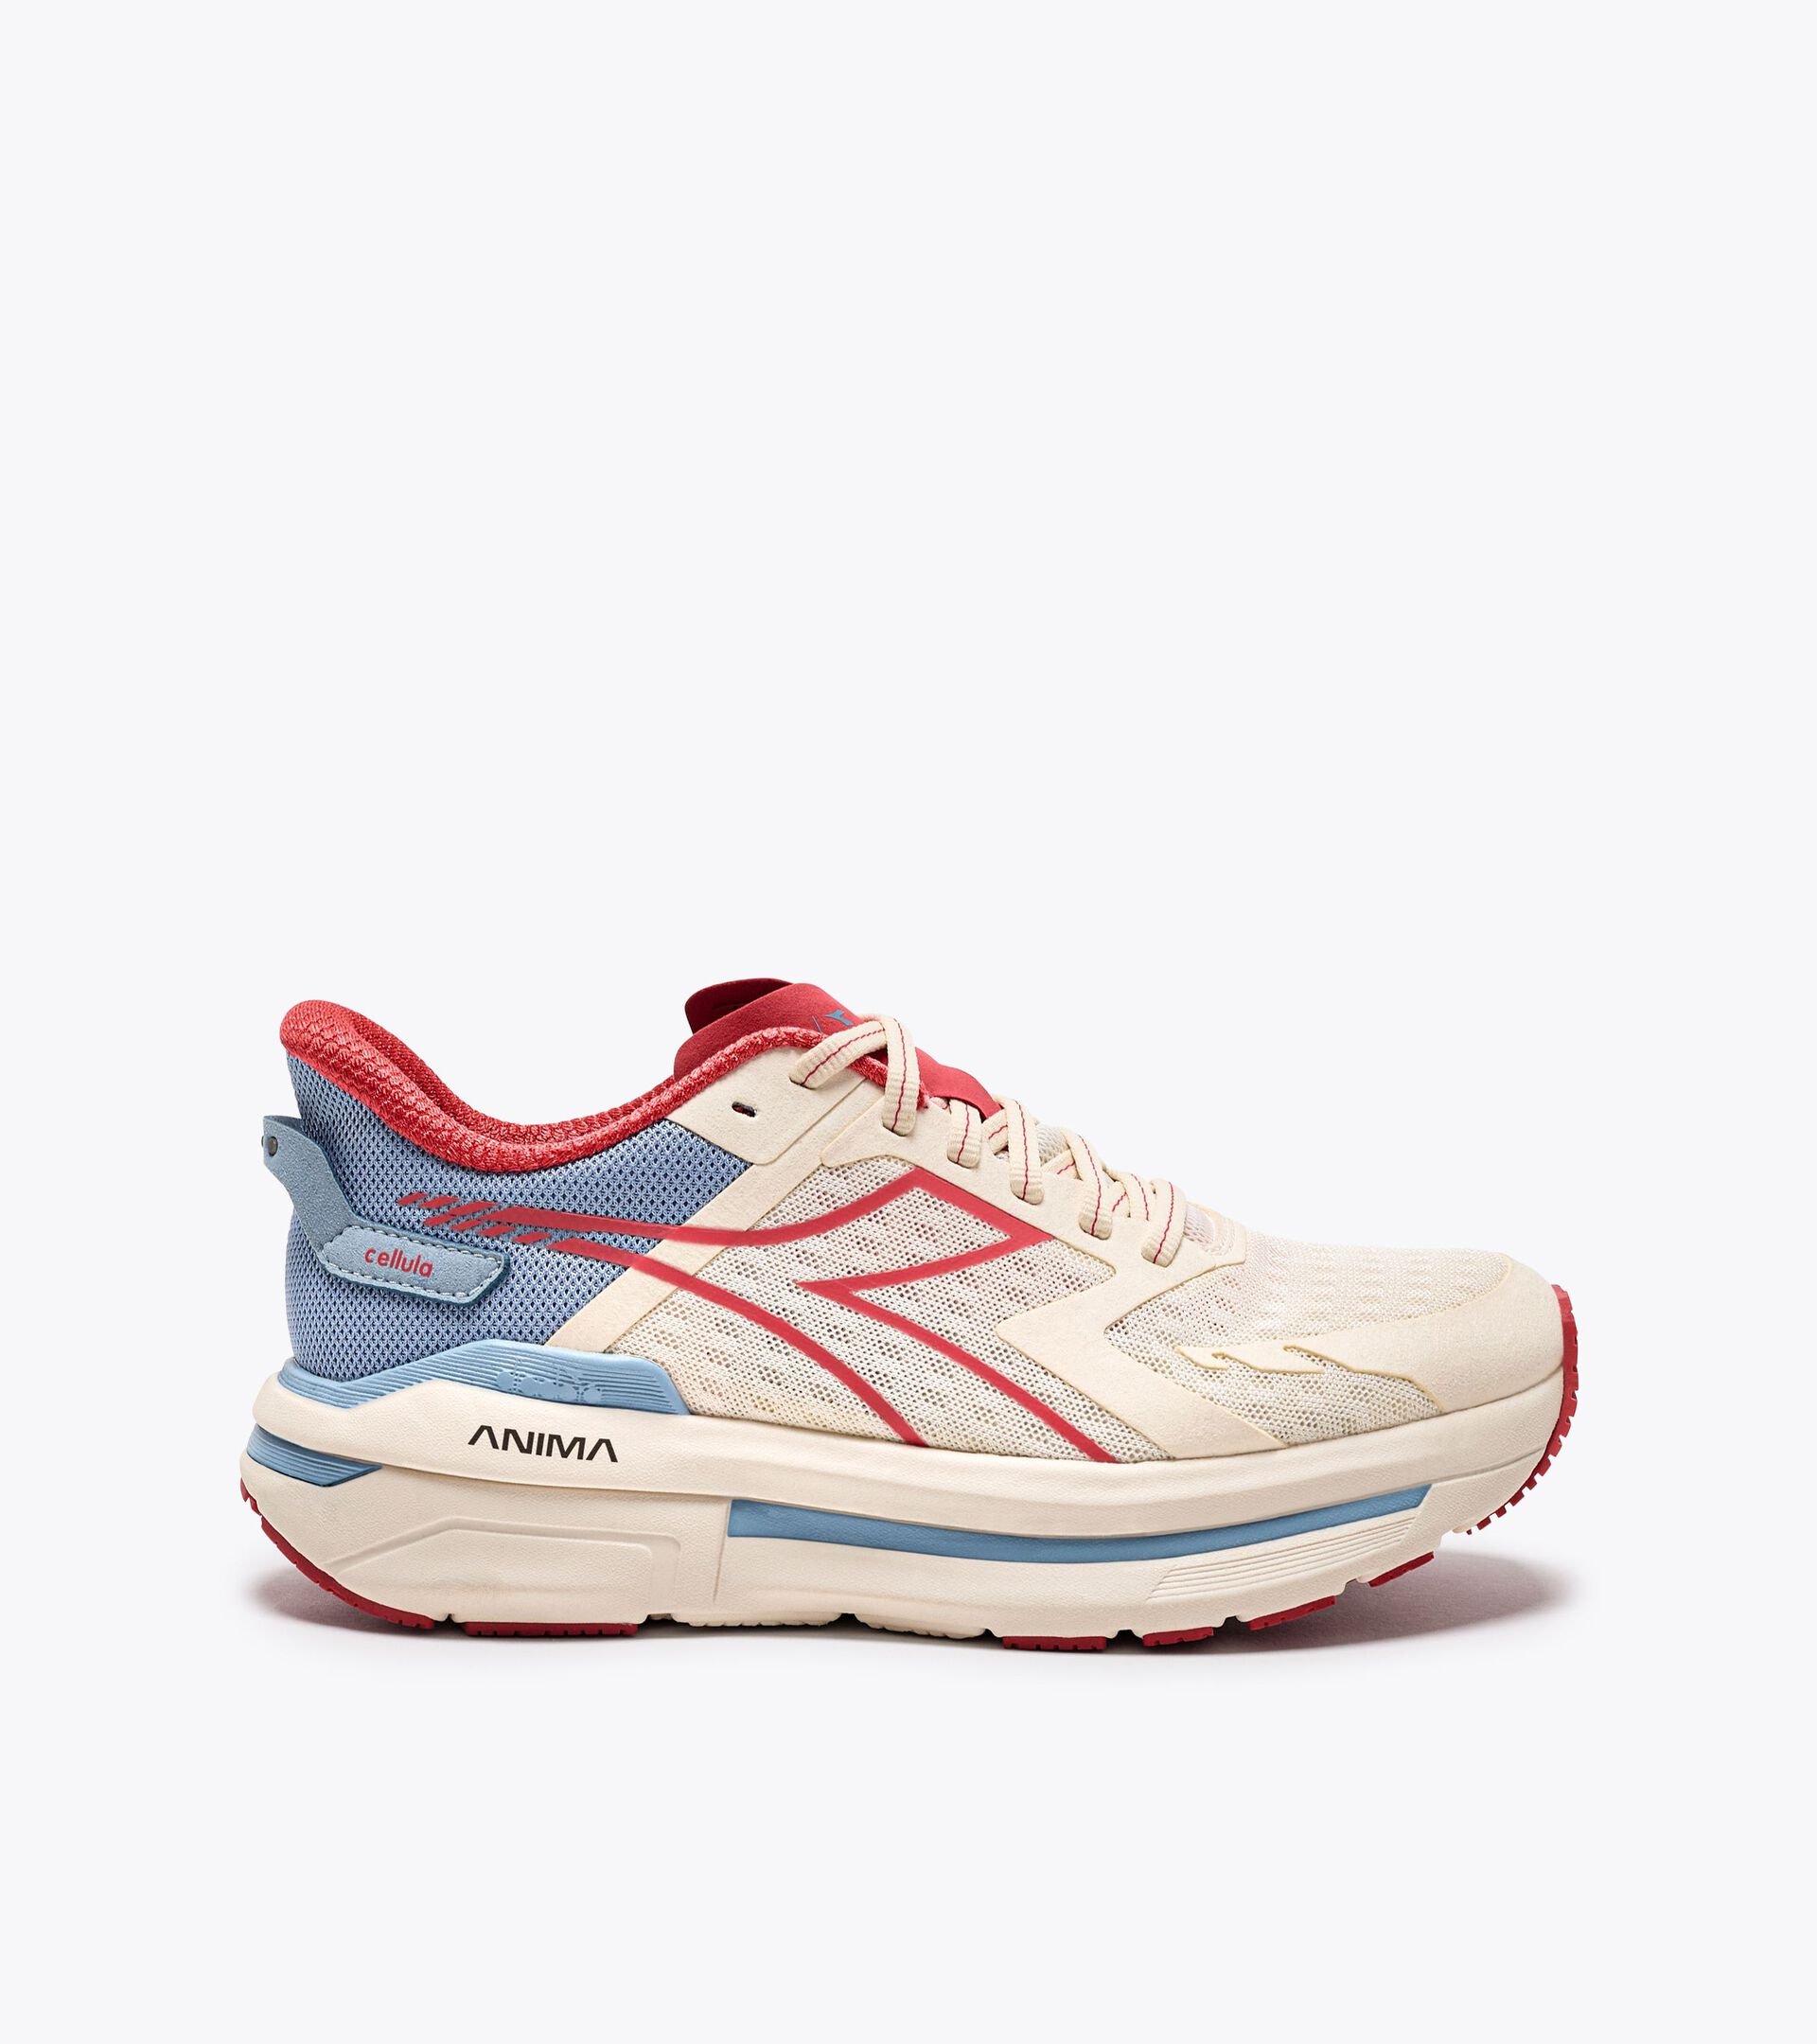 Running shoe - Comfort and stability - Women’s CELLULA W WHISPER WHITE/CAYENNE - Diadora